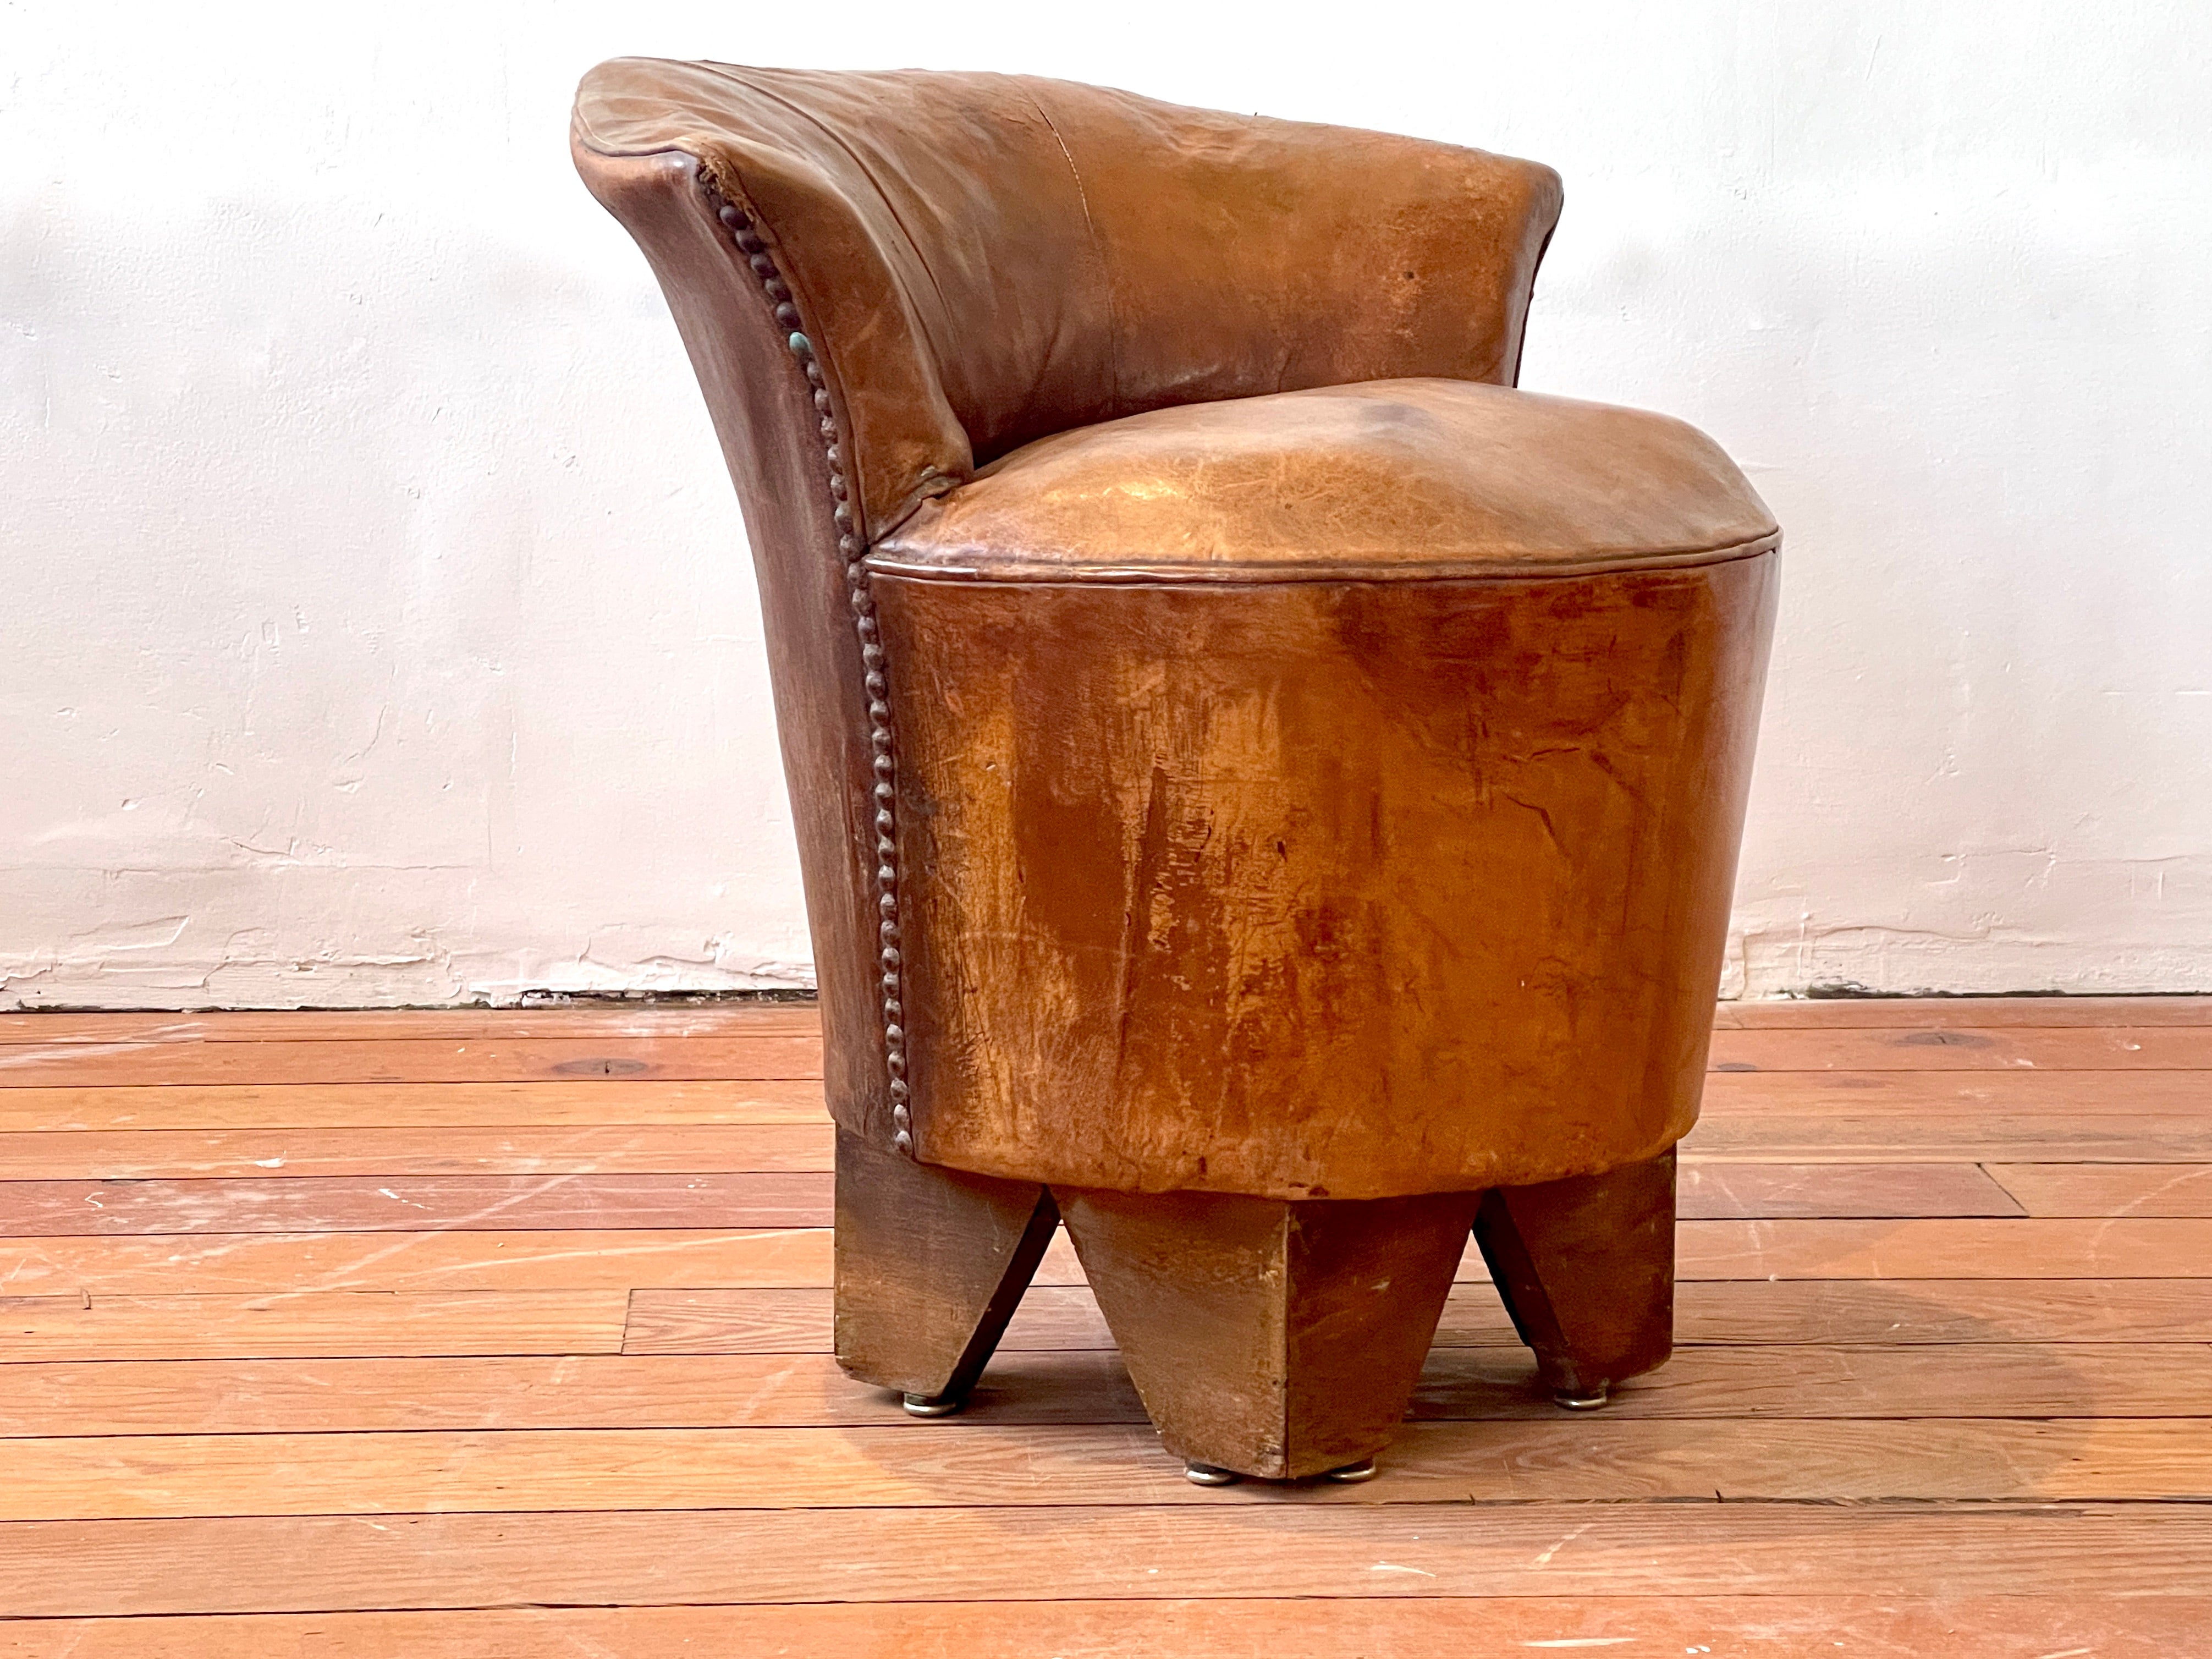 Petite Art Deco French leather stool with just the right patina and curves. 
Chunky thick legs with brass tack detail along the curved sides. 
Great shape and scale and patina. 
France, circa 1940s.